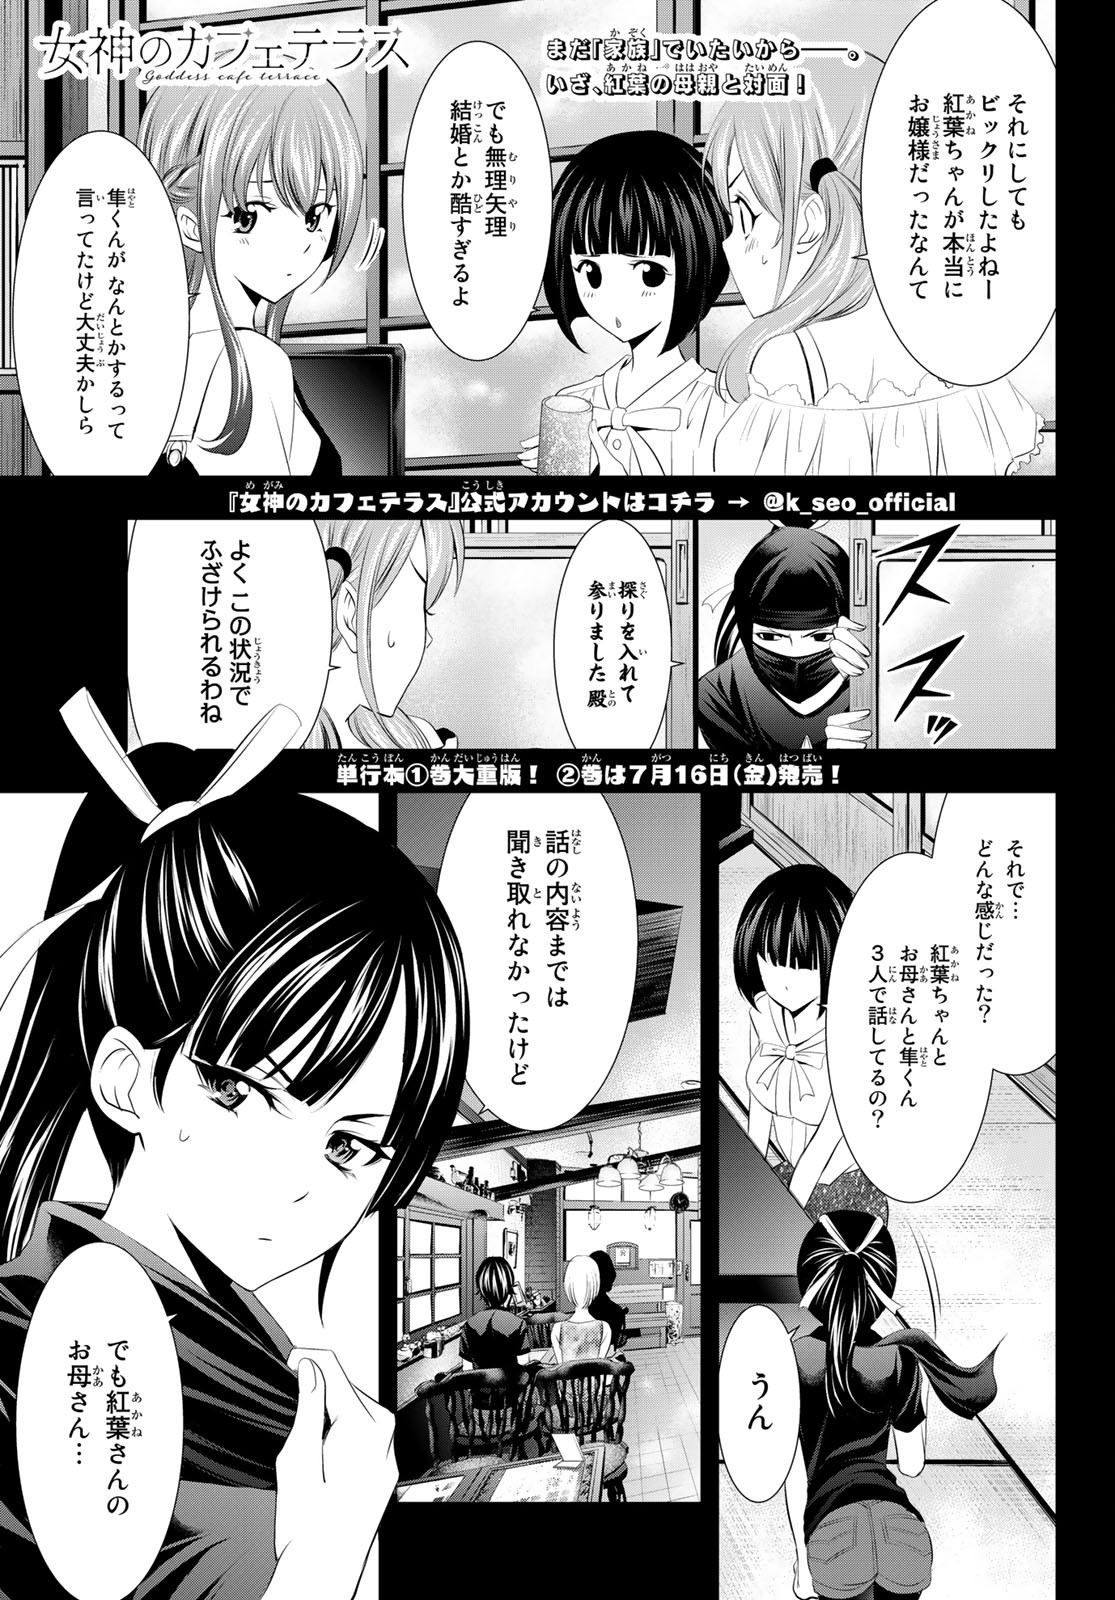 Megami no Cafe Terace - Chapter 19 - Page 1